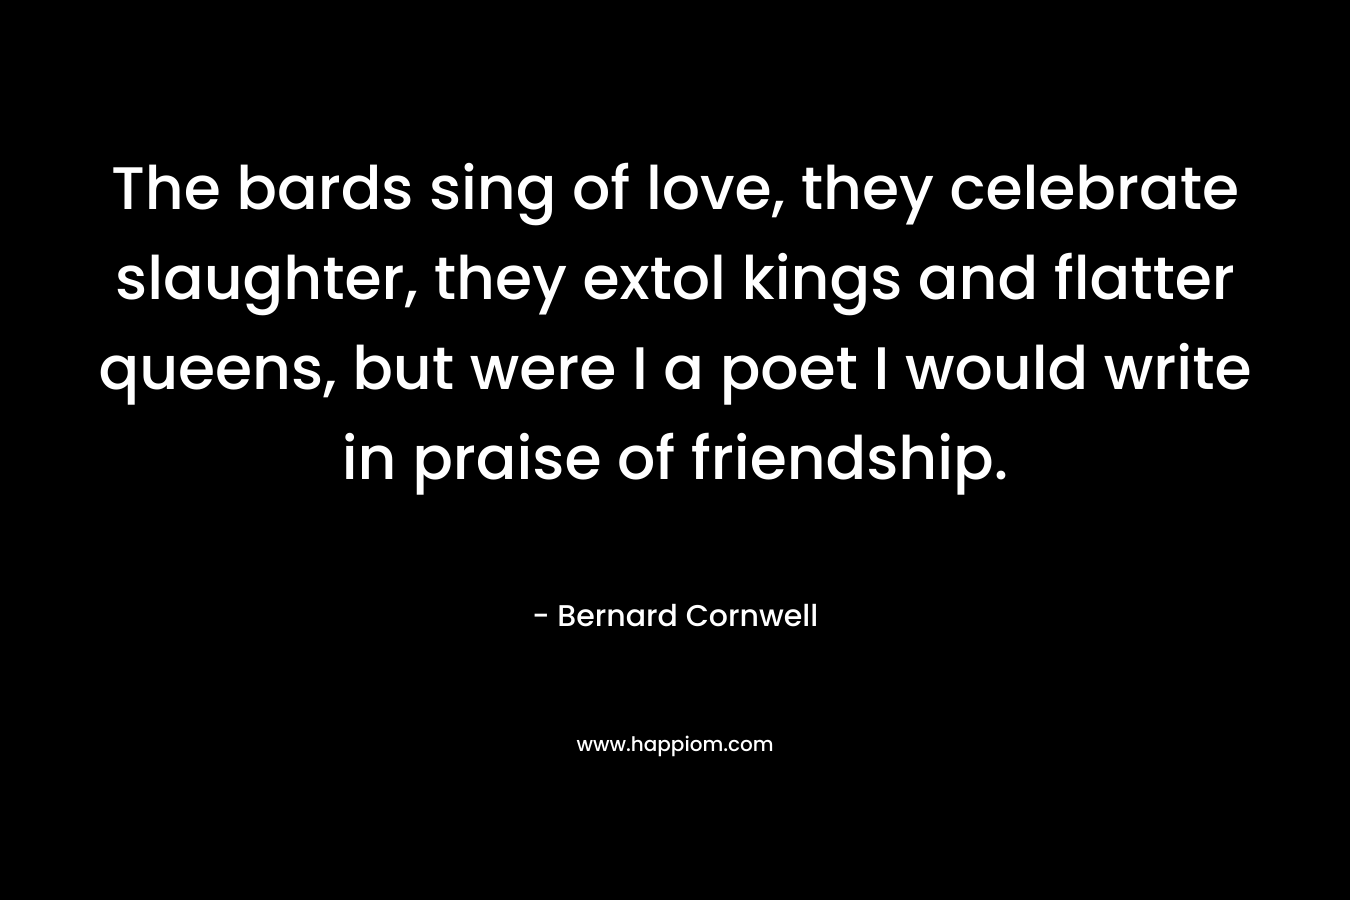 The bards sing of love, they celebrate slaughter, they extol kings and flatter queens, but were I a poet I would write in praise of friendship. – Bernard Cornwell